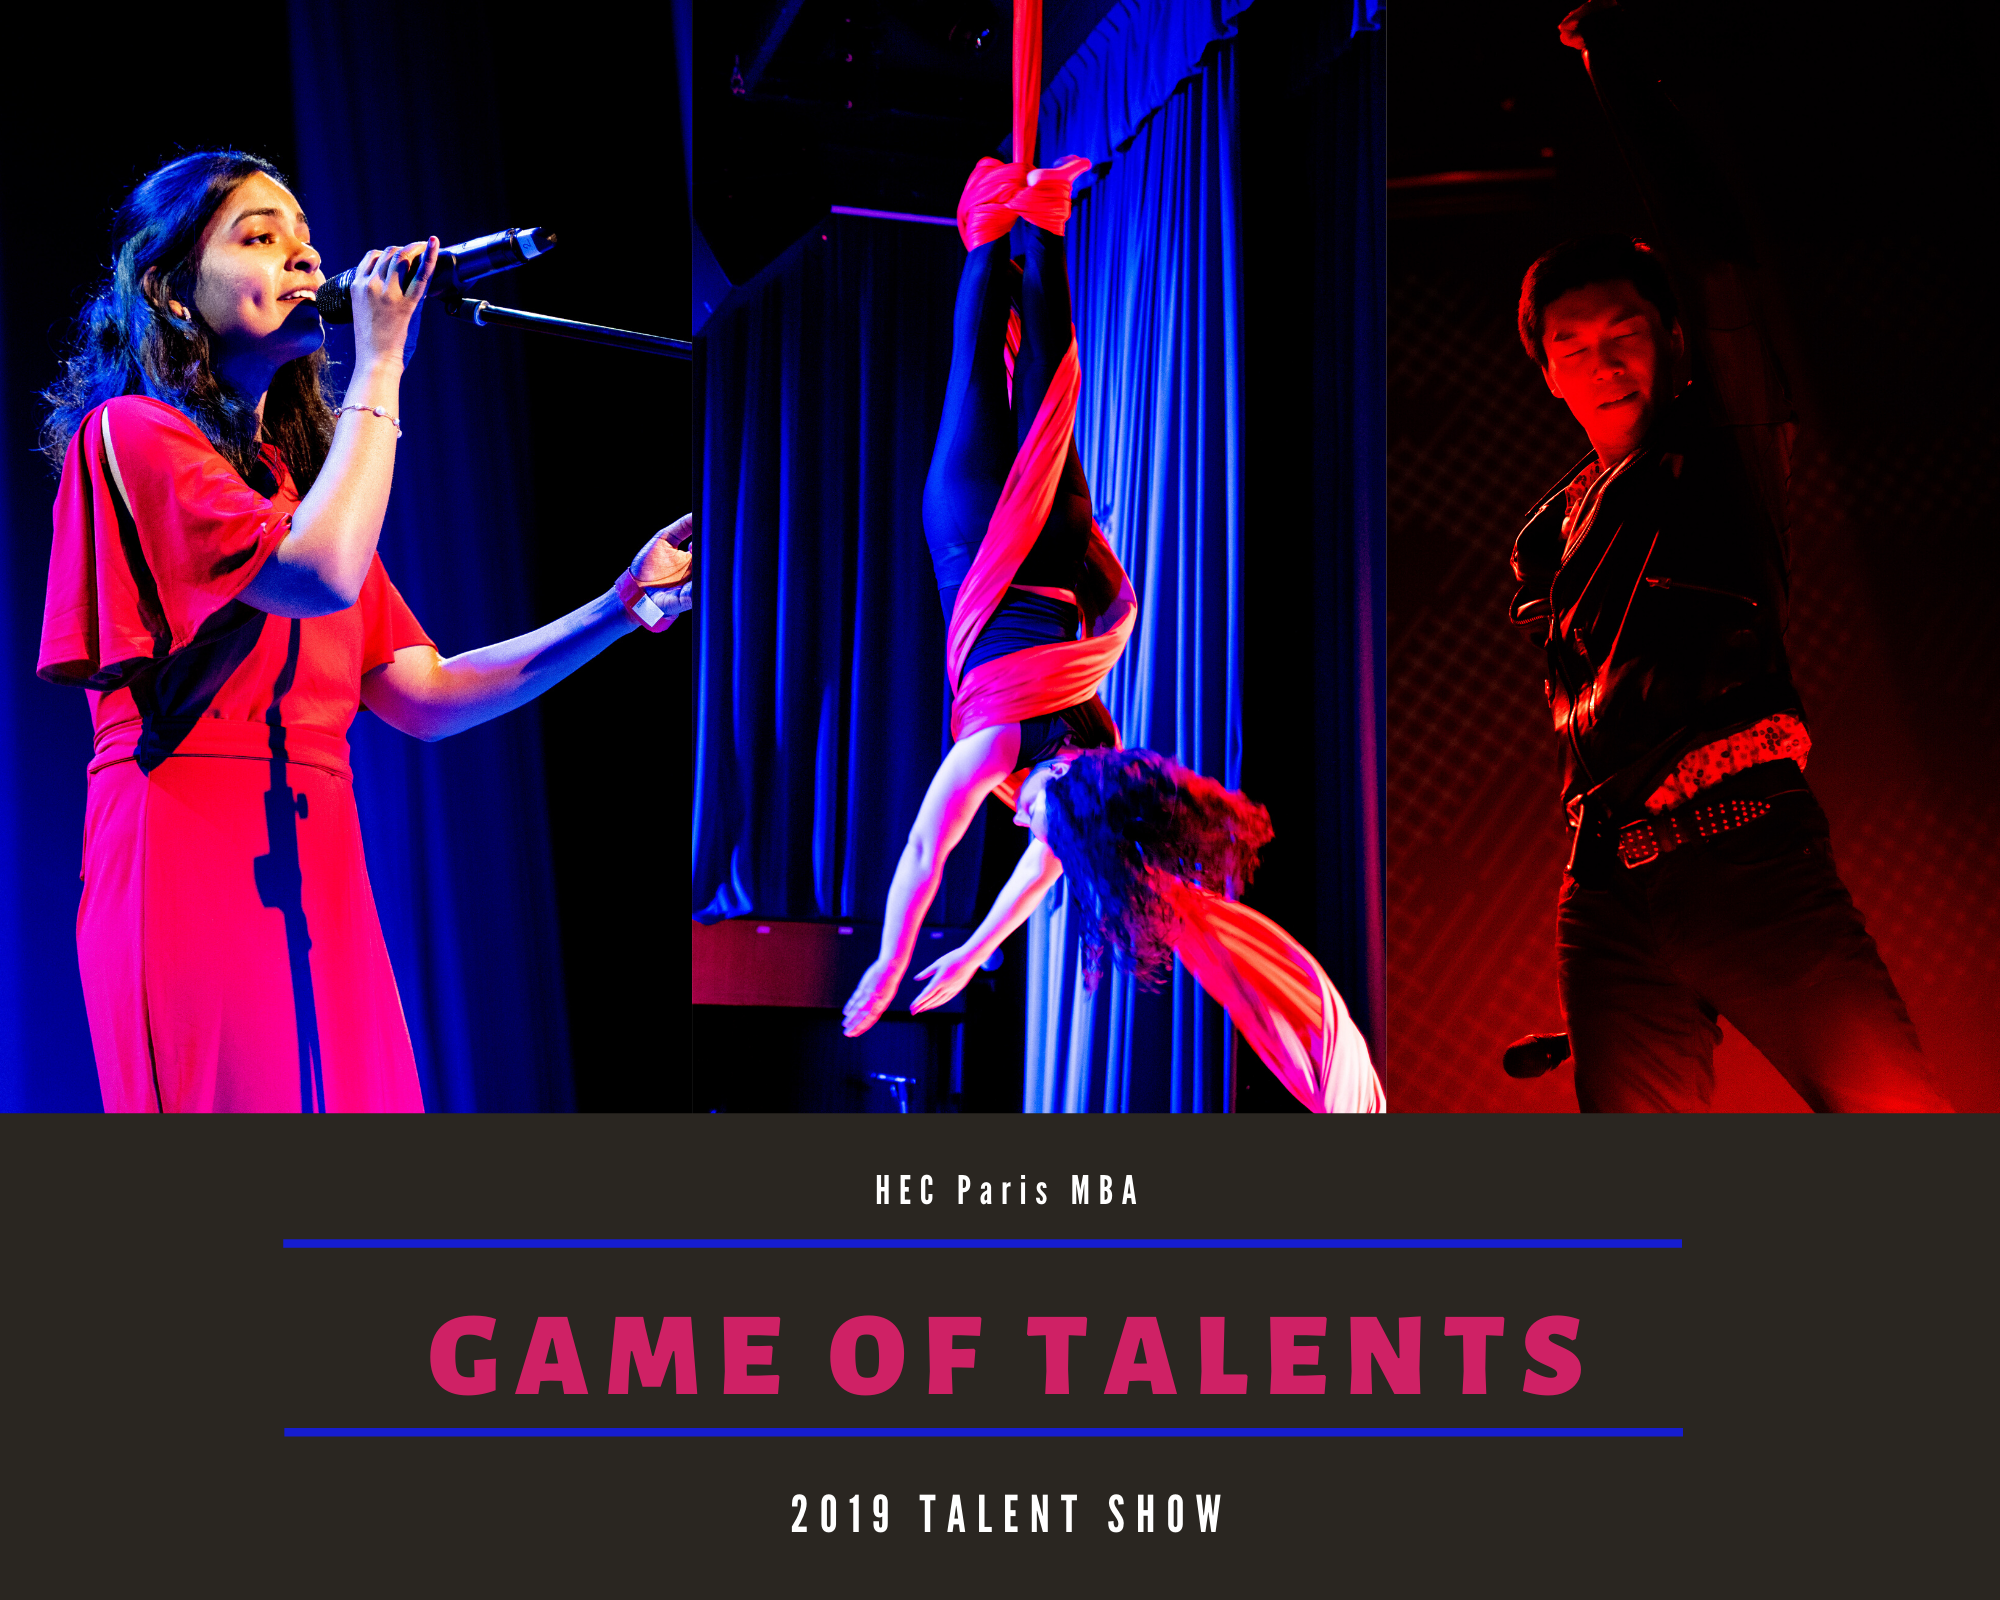 Collage of photos from the HEC Paris MBA Talent Show 2019